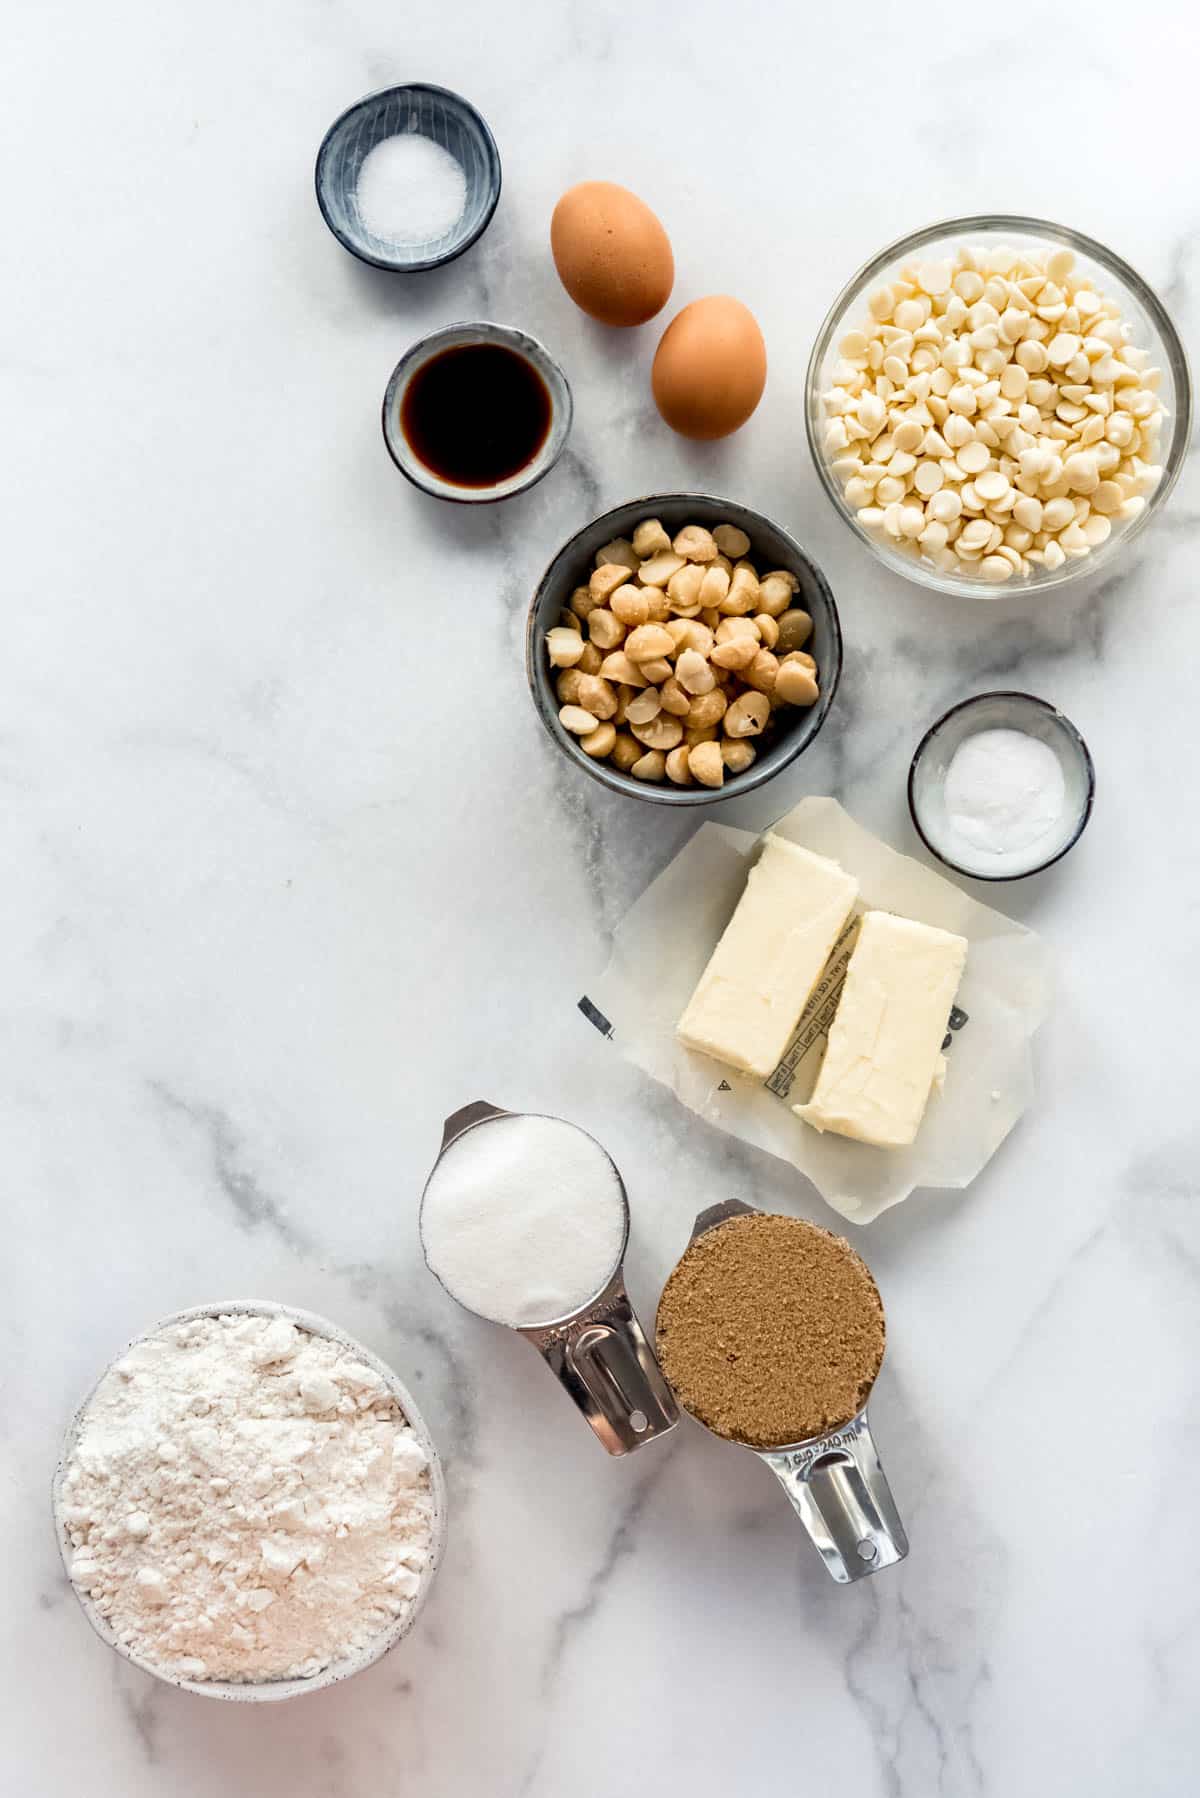 Ingredients for White Chocolate Macadamia Nut Cookies.